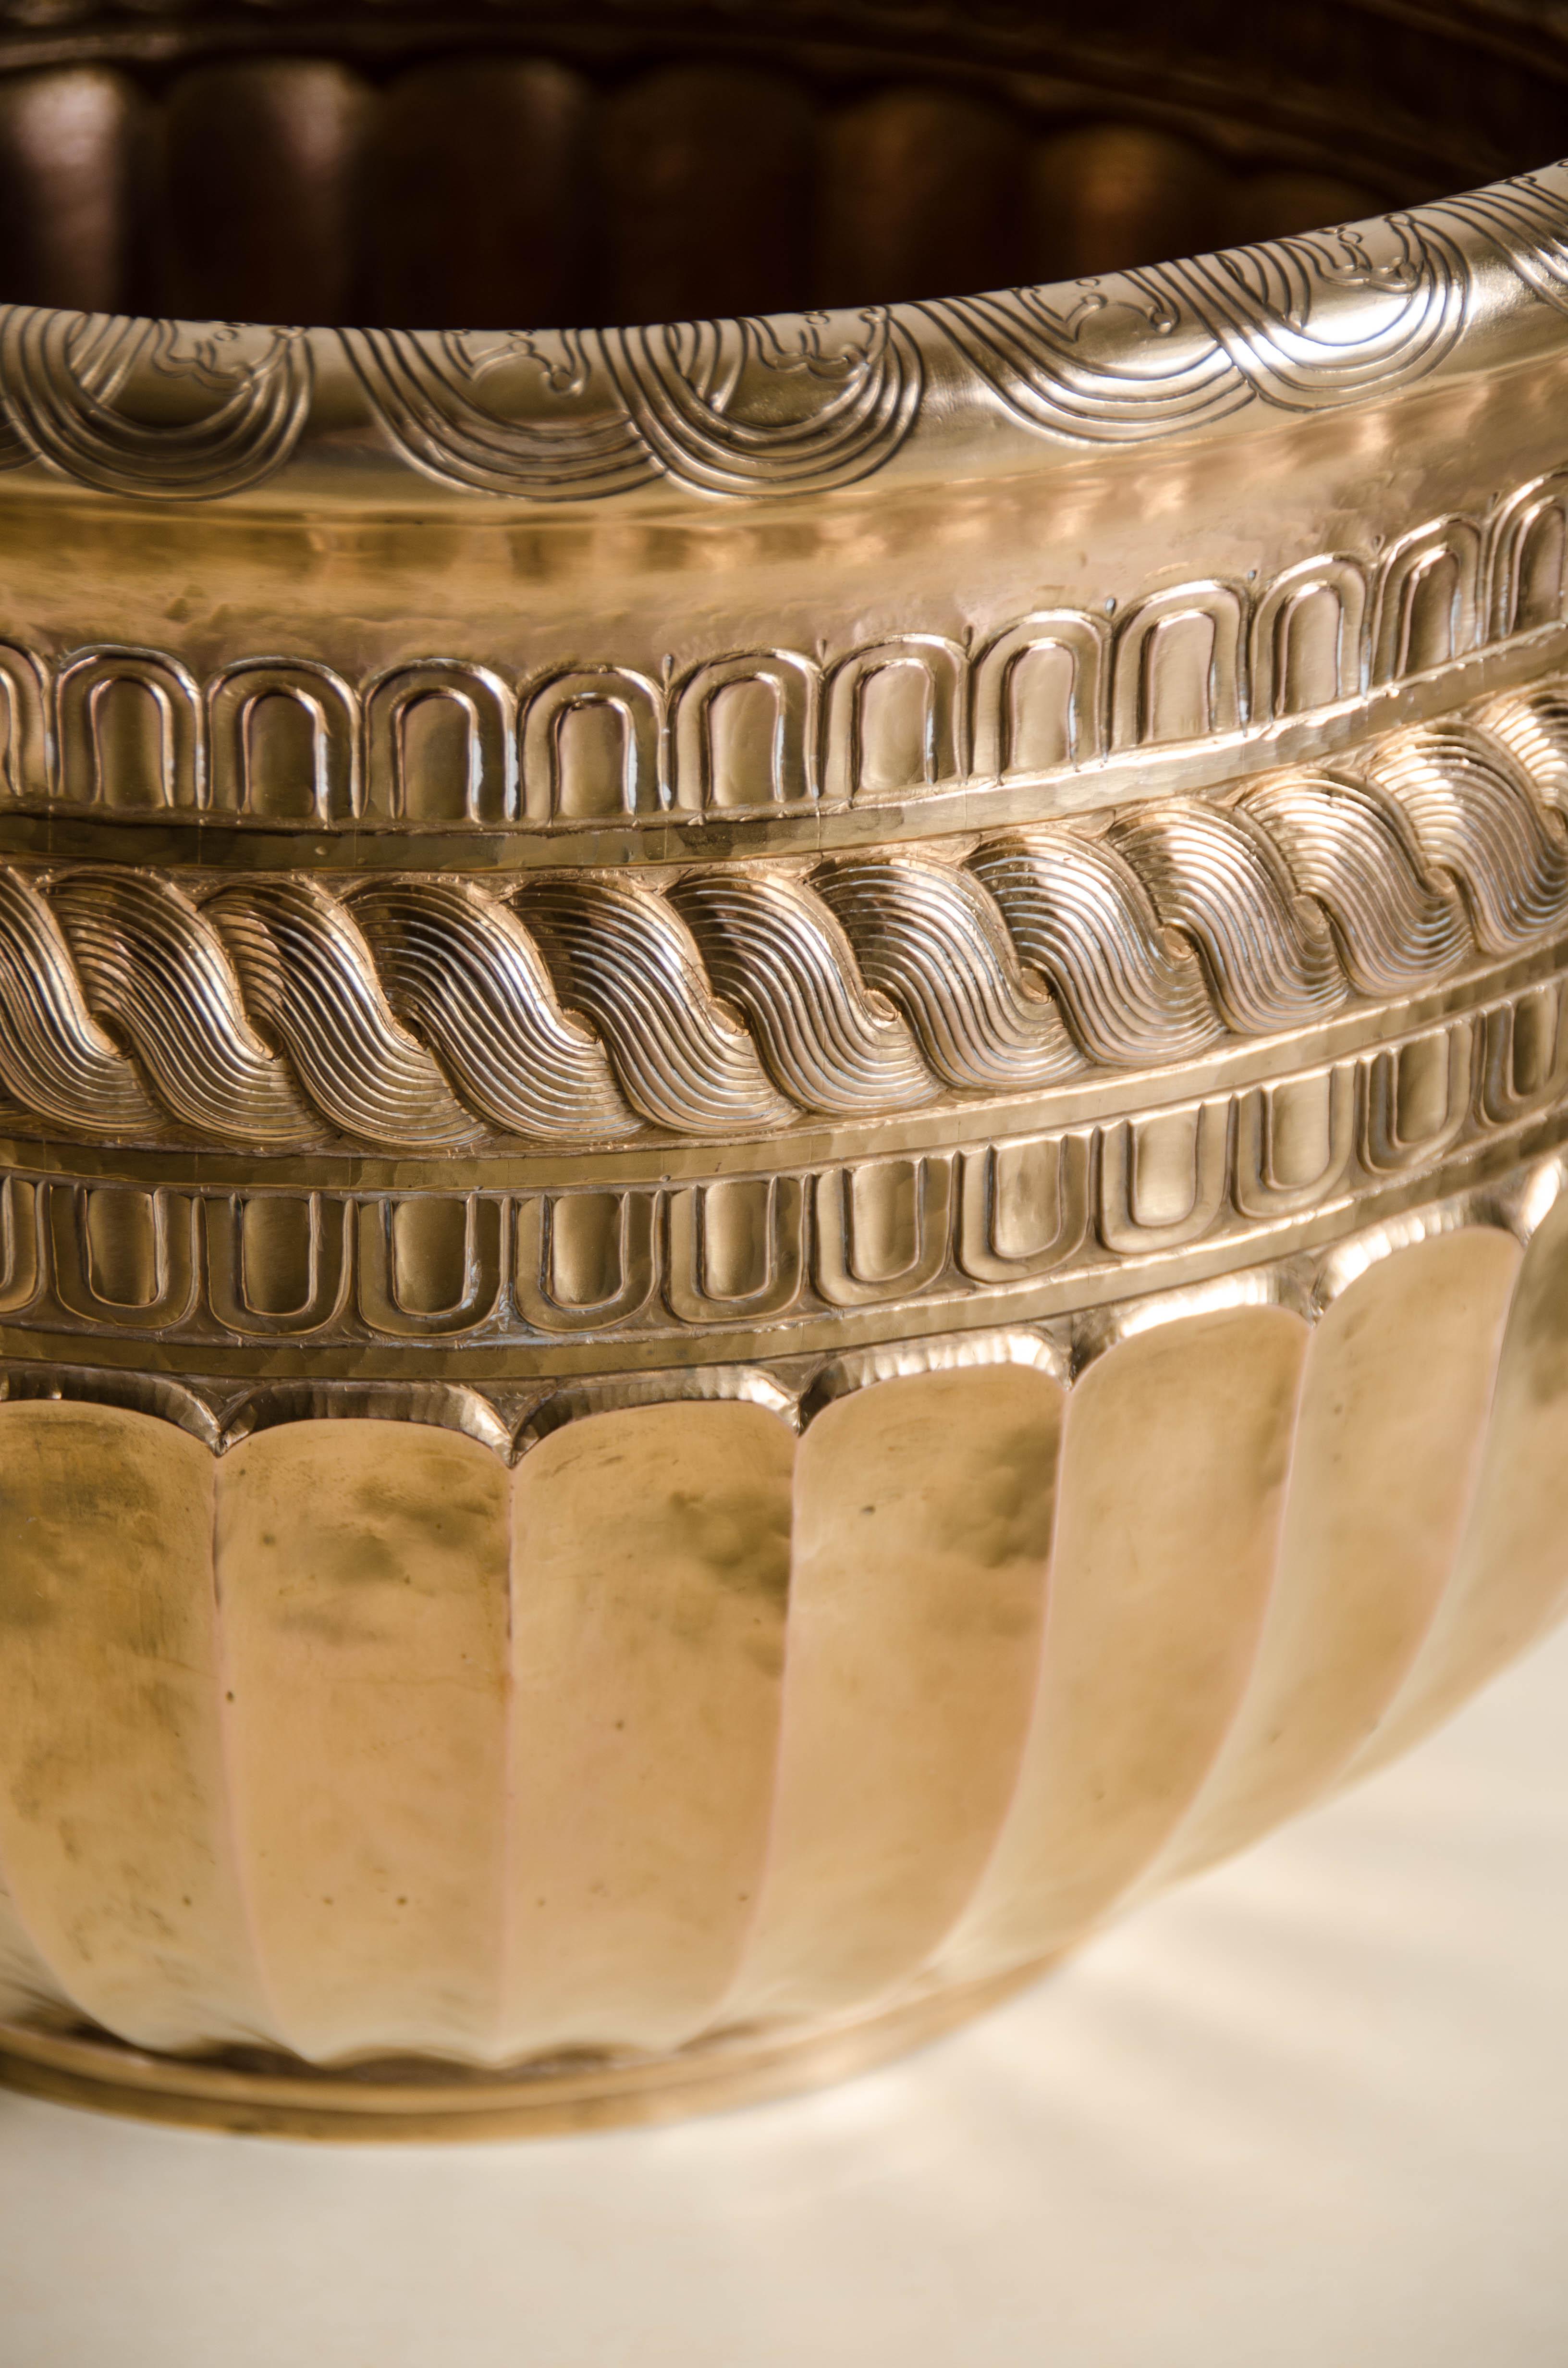 Repoussé Gold Tang Design Pot, 24-Karat Gold Plate by Robert Kuo, Hand Repousse, Limited For Sale